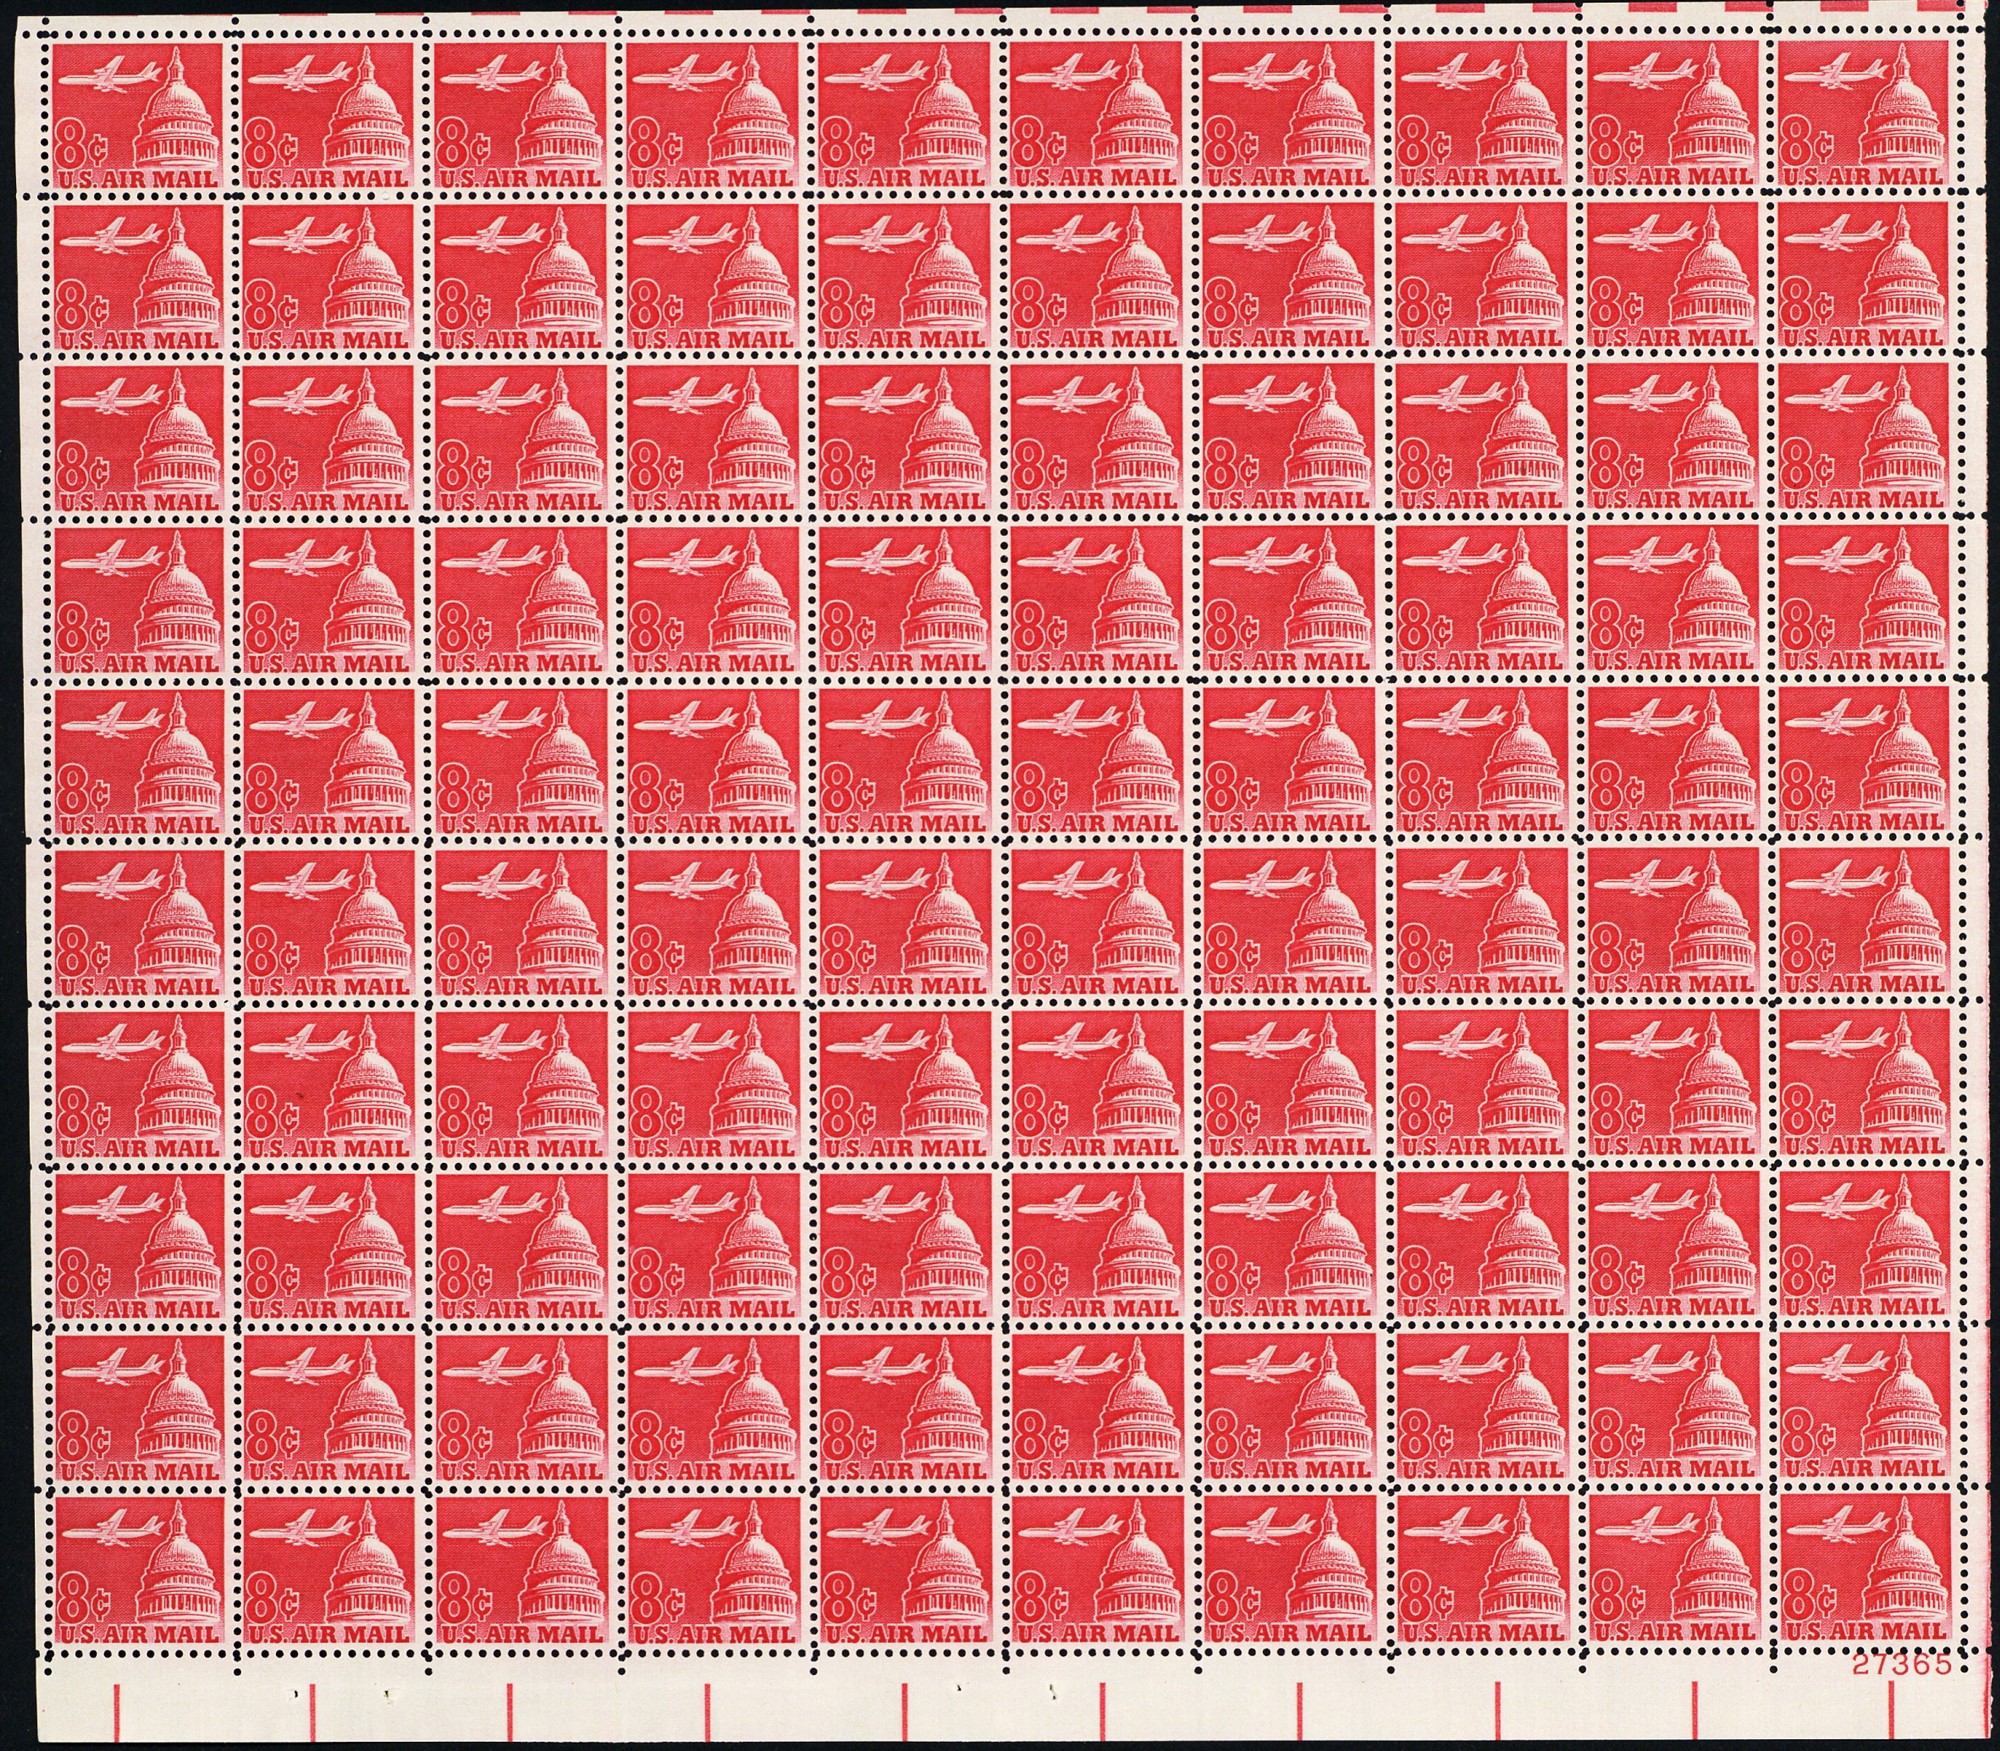 8 cent airmail stamp